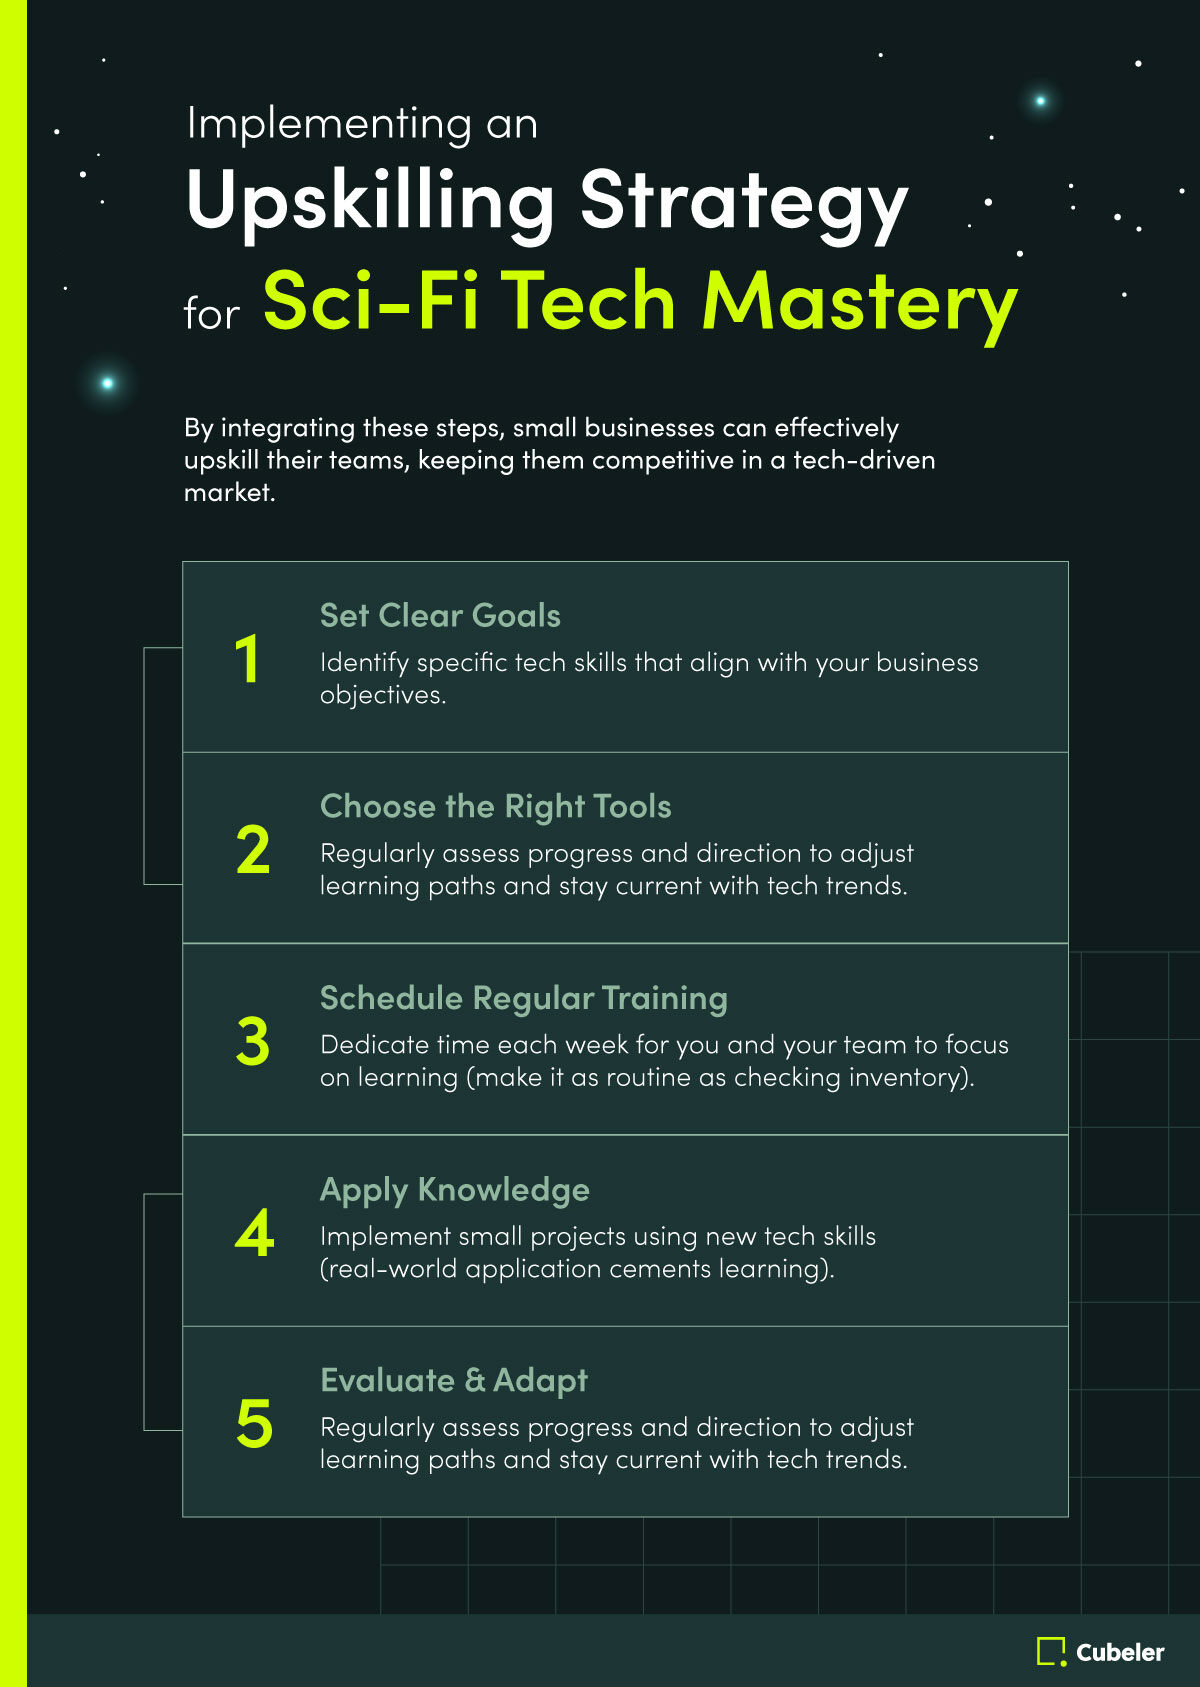 Implementing an Upskilling Strategy for Sci-Fi Tech Mastery